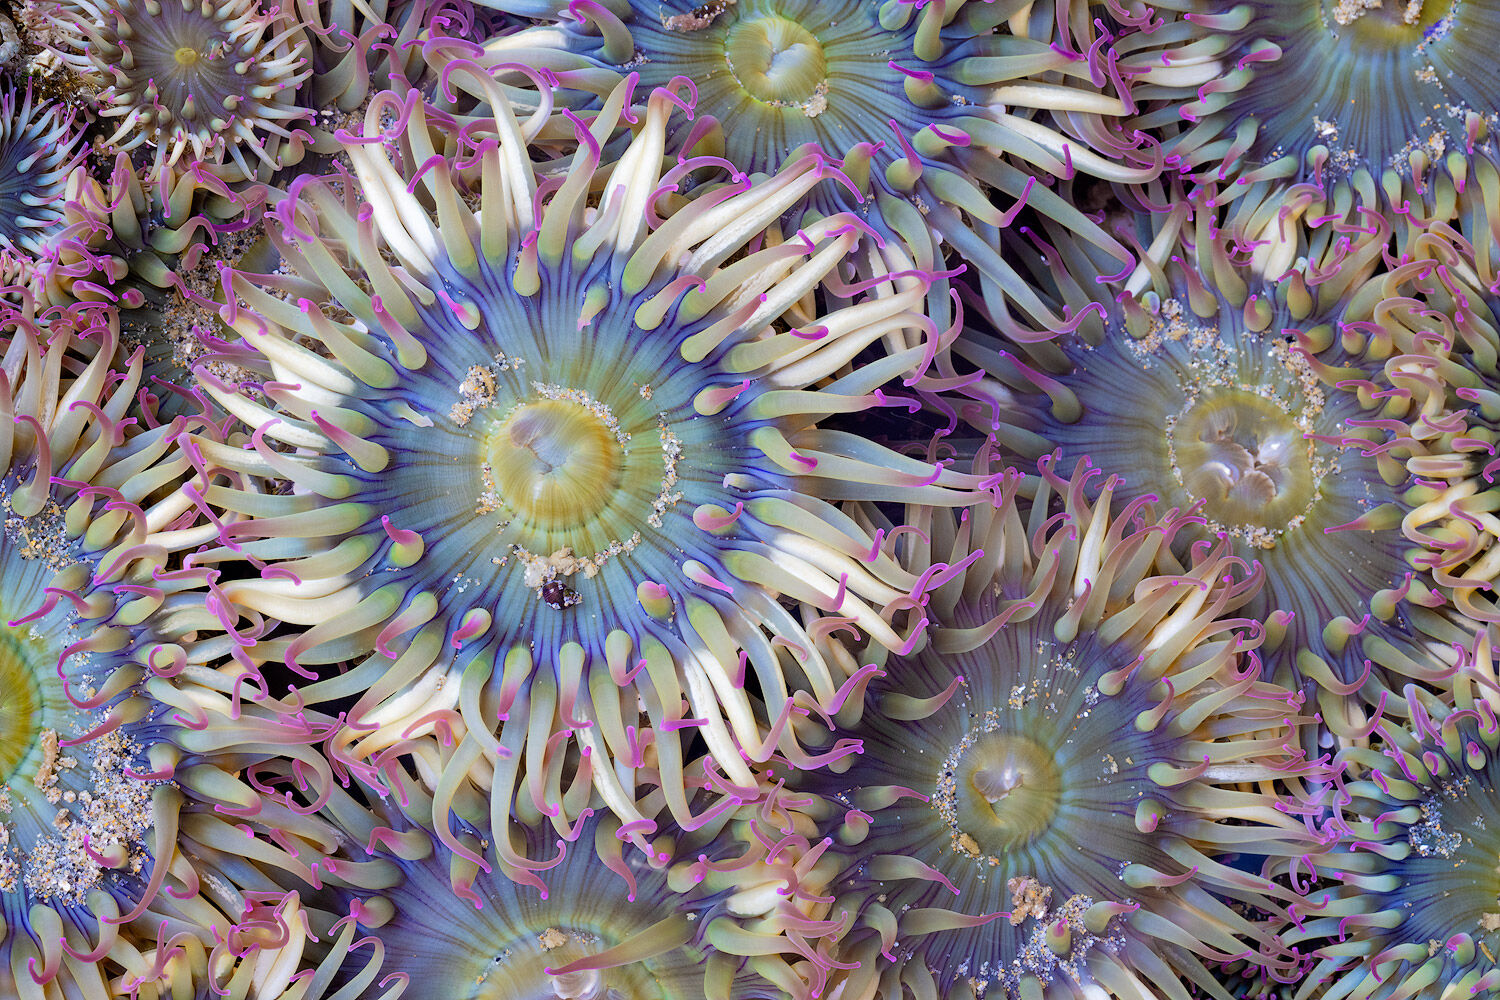 A bowl of sea anemones in a tide pool along the Oregon Coast during low tide. Limited Edition of 100